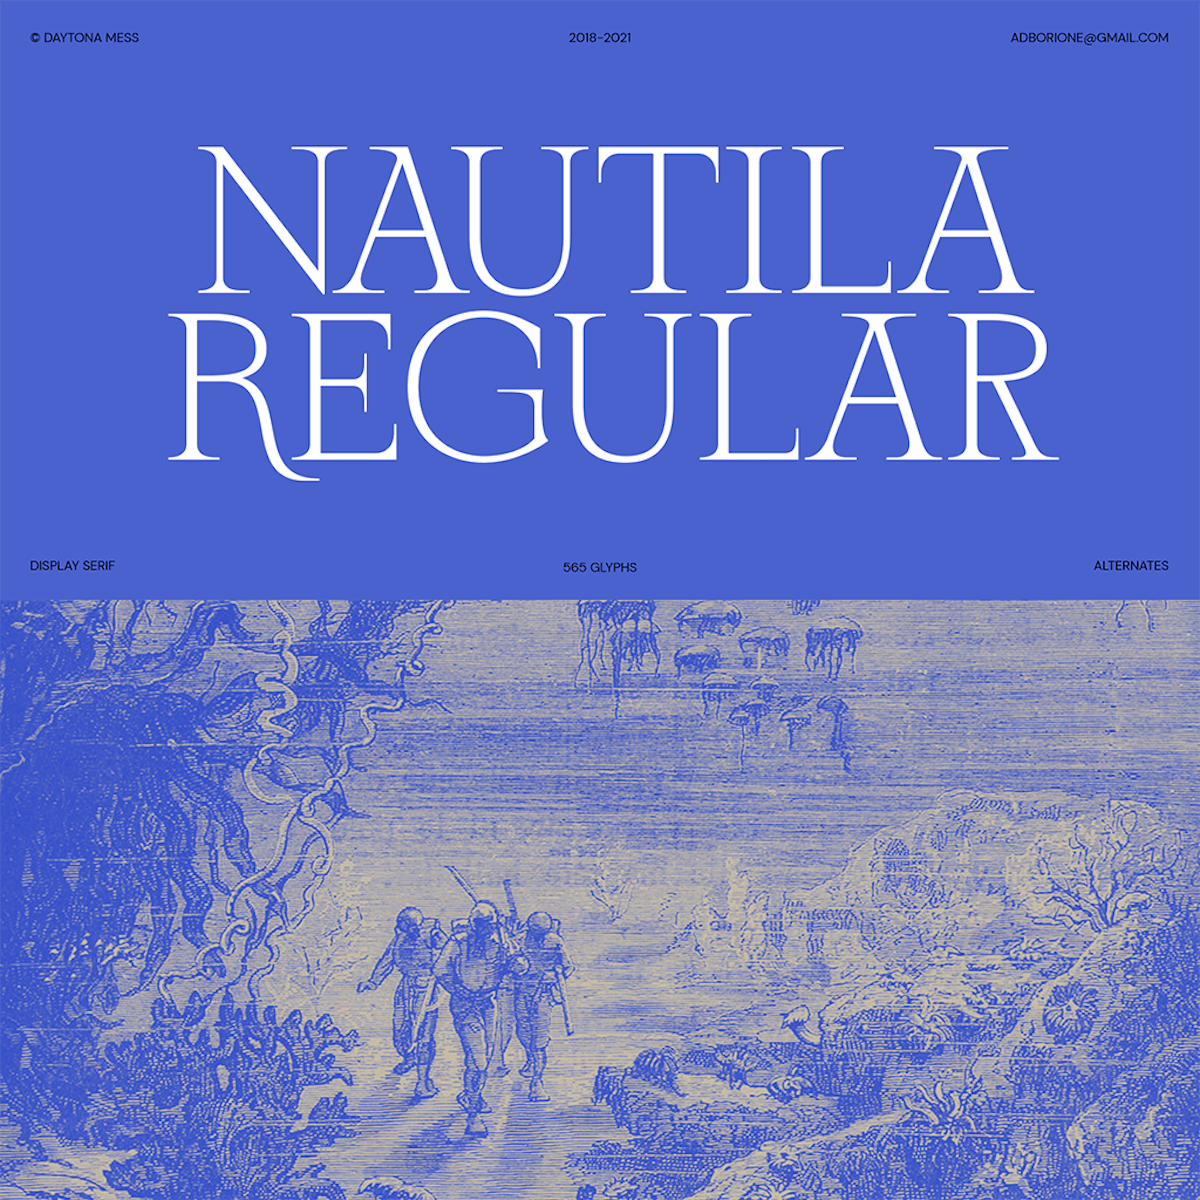 Nautila Regular, a font designed by Daytona Mess available on Type Department.